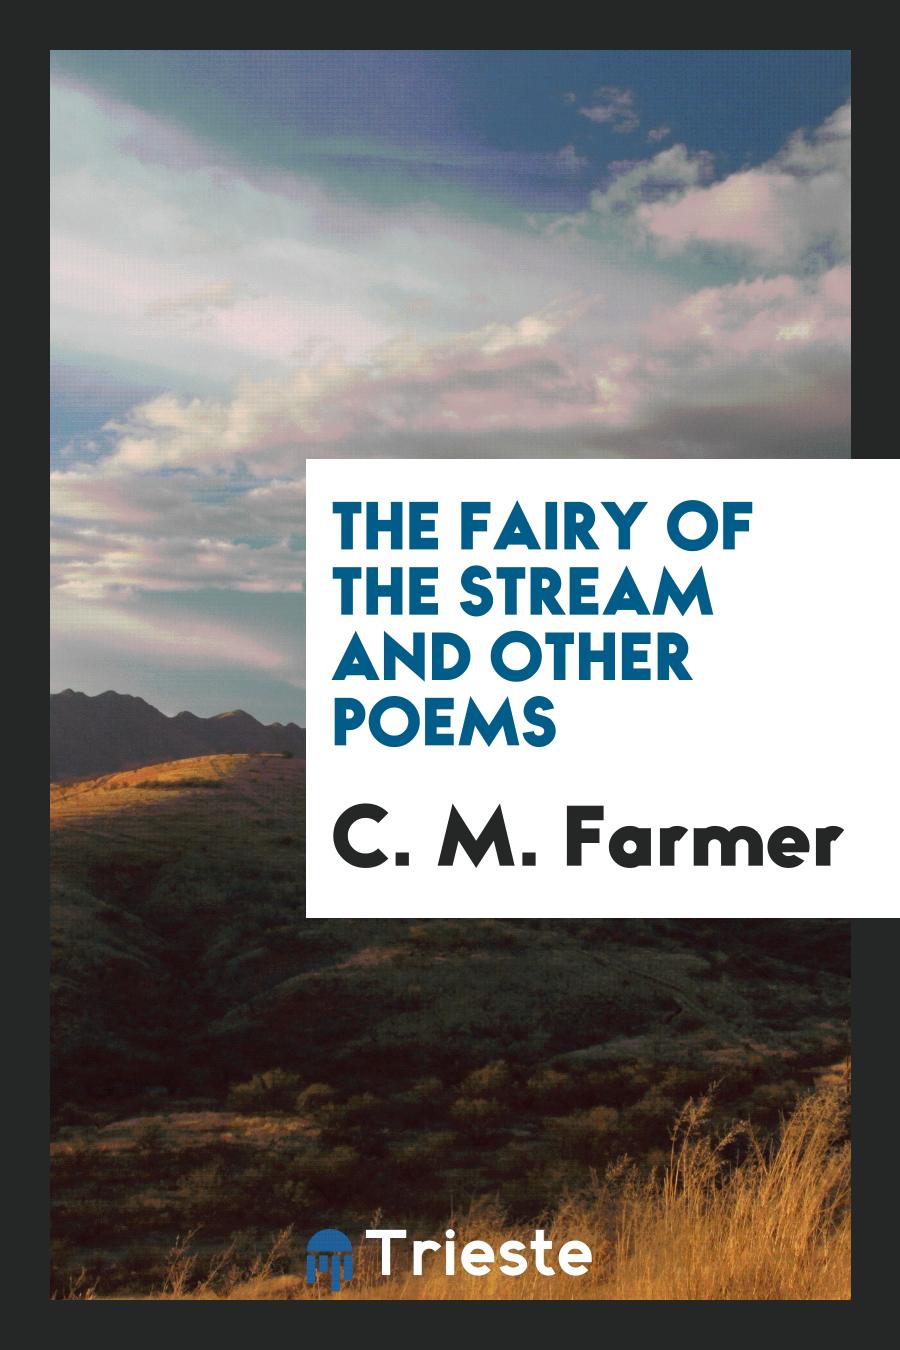 The Fairy of the Stream and Other Poems